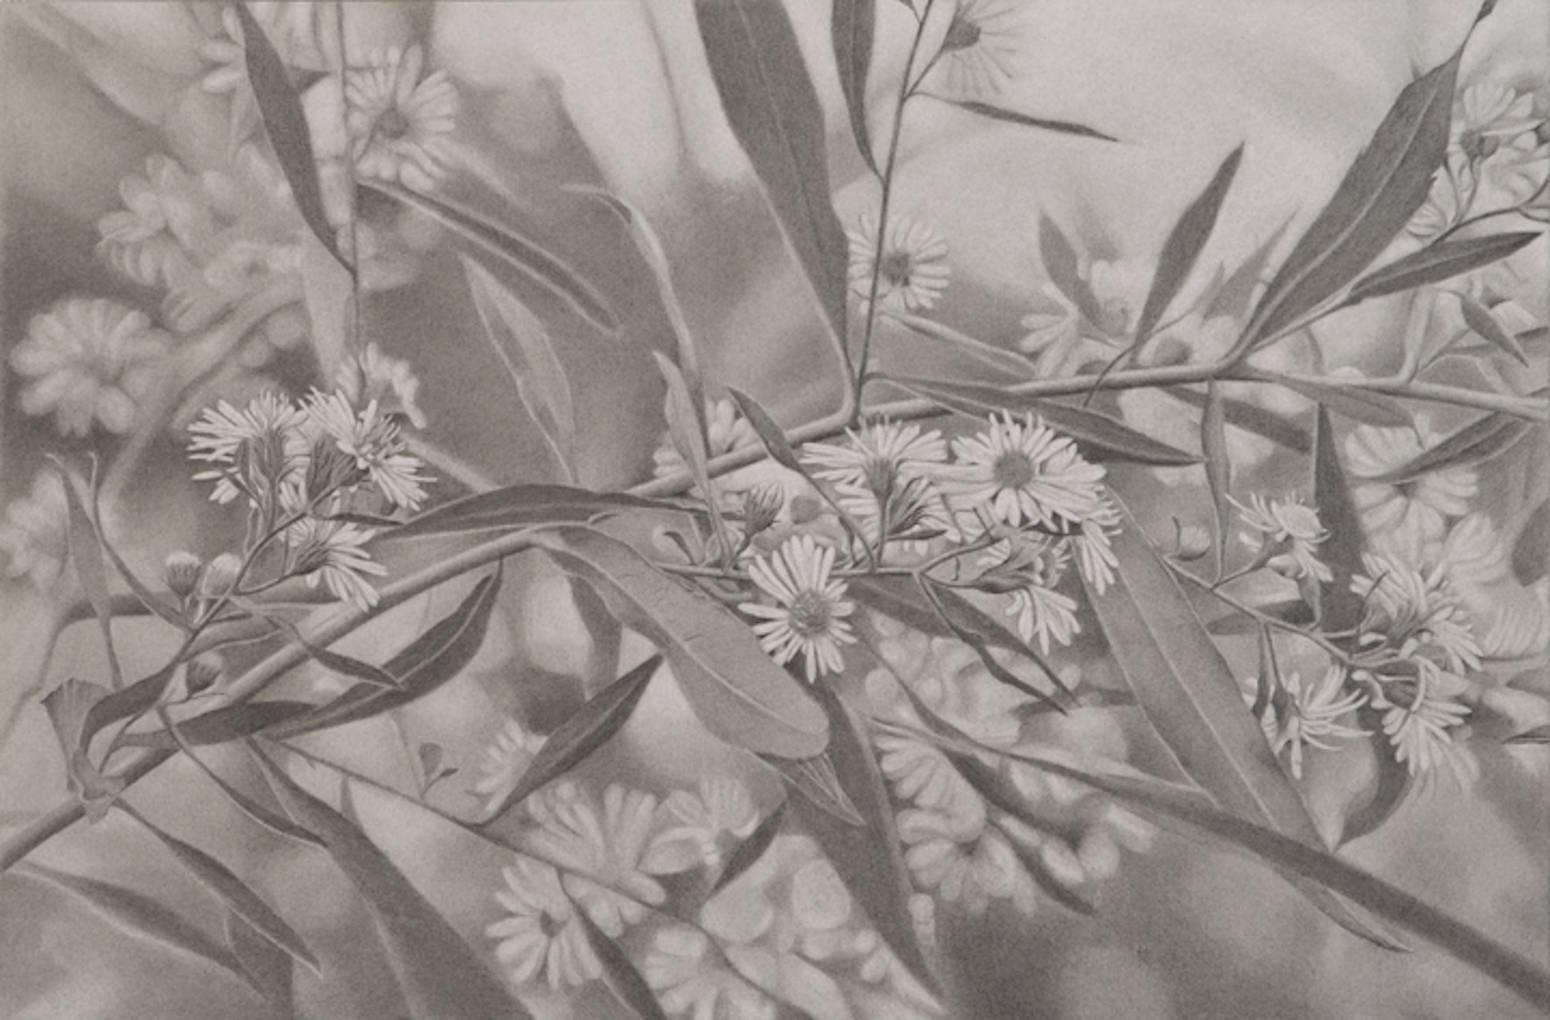 Reilly uses a toning technique to endow her graphite works with a smooth, seamless quality. Rather than distinct outlines, her flower petals glide gracefully into the surrounding space. It is this sense of delicacy, coupled with precision of her